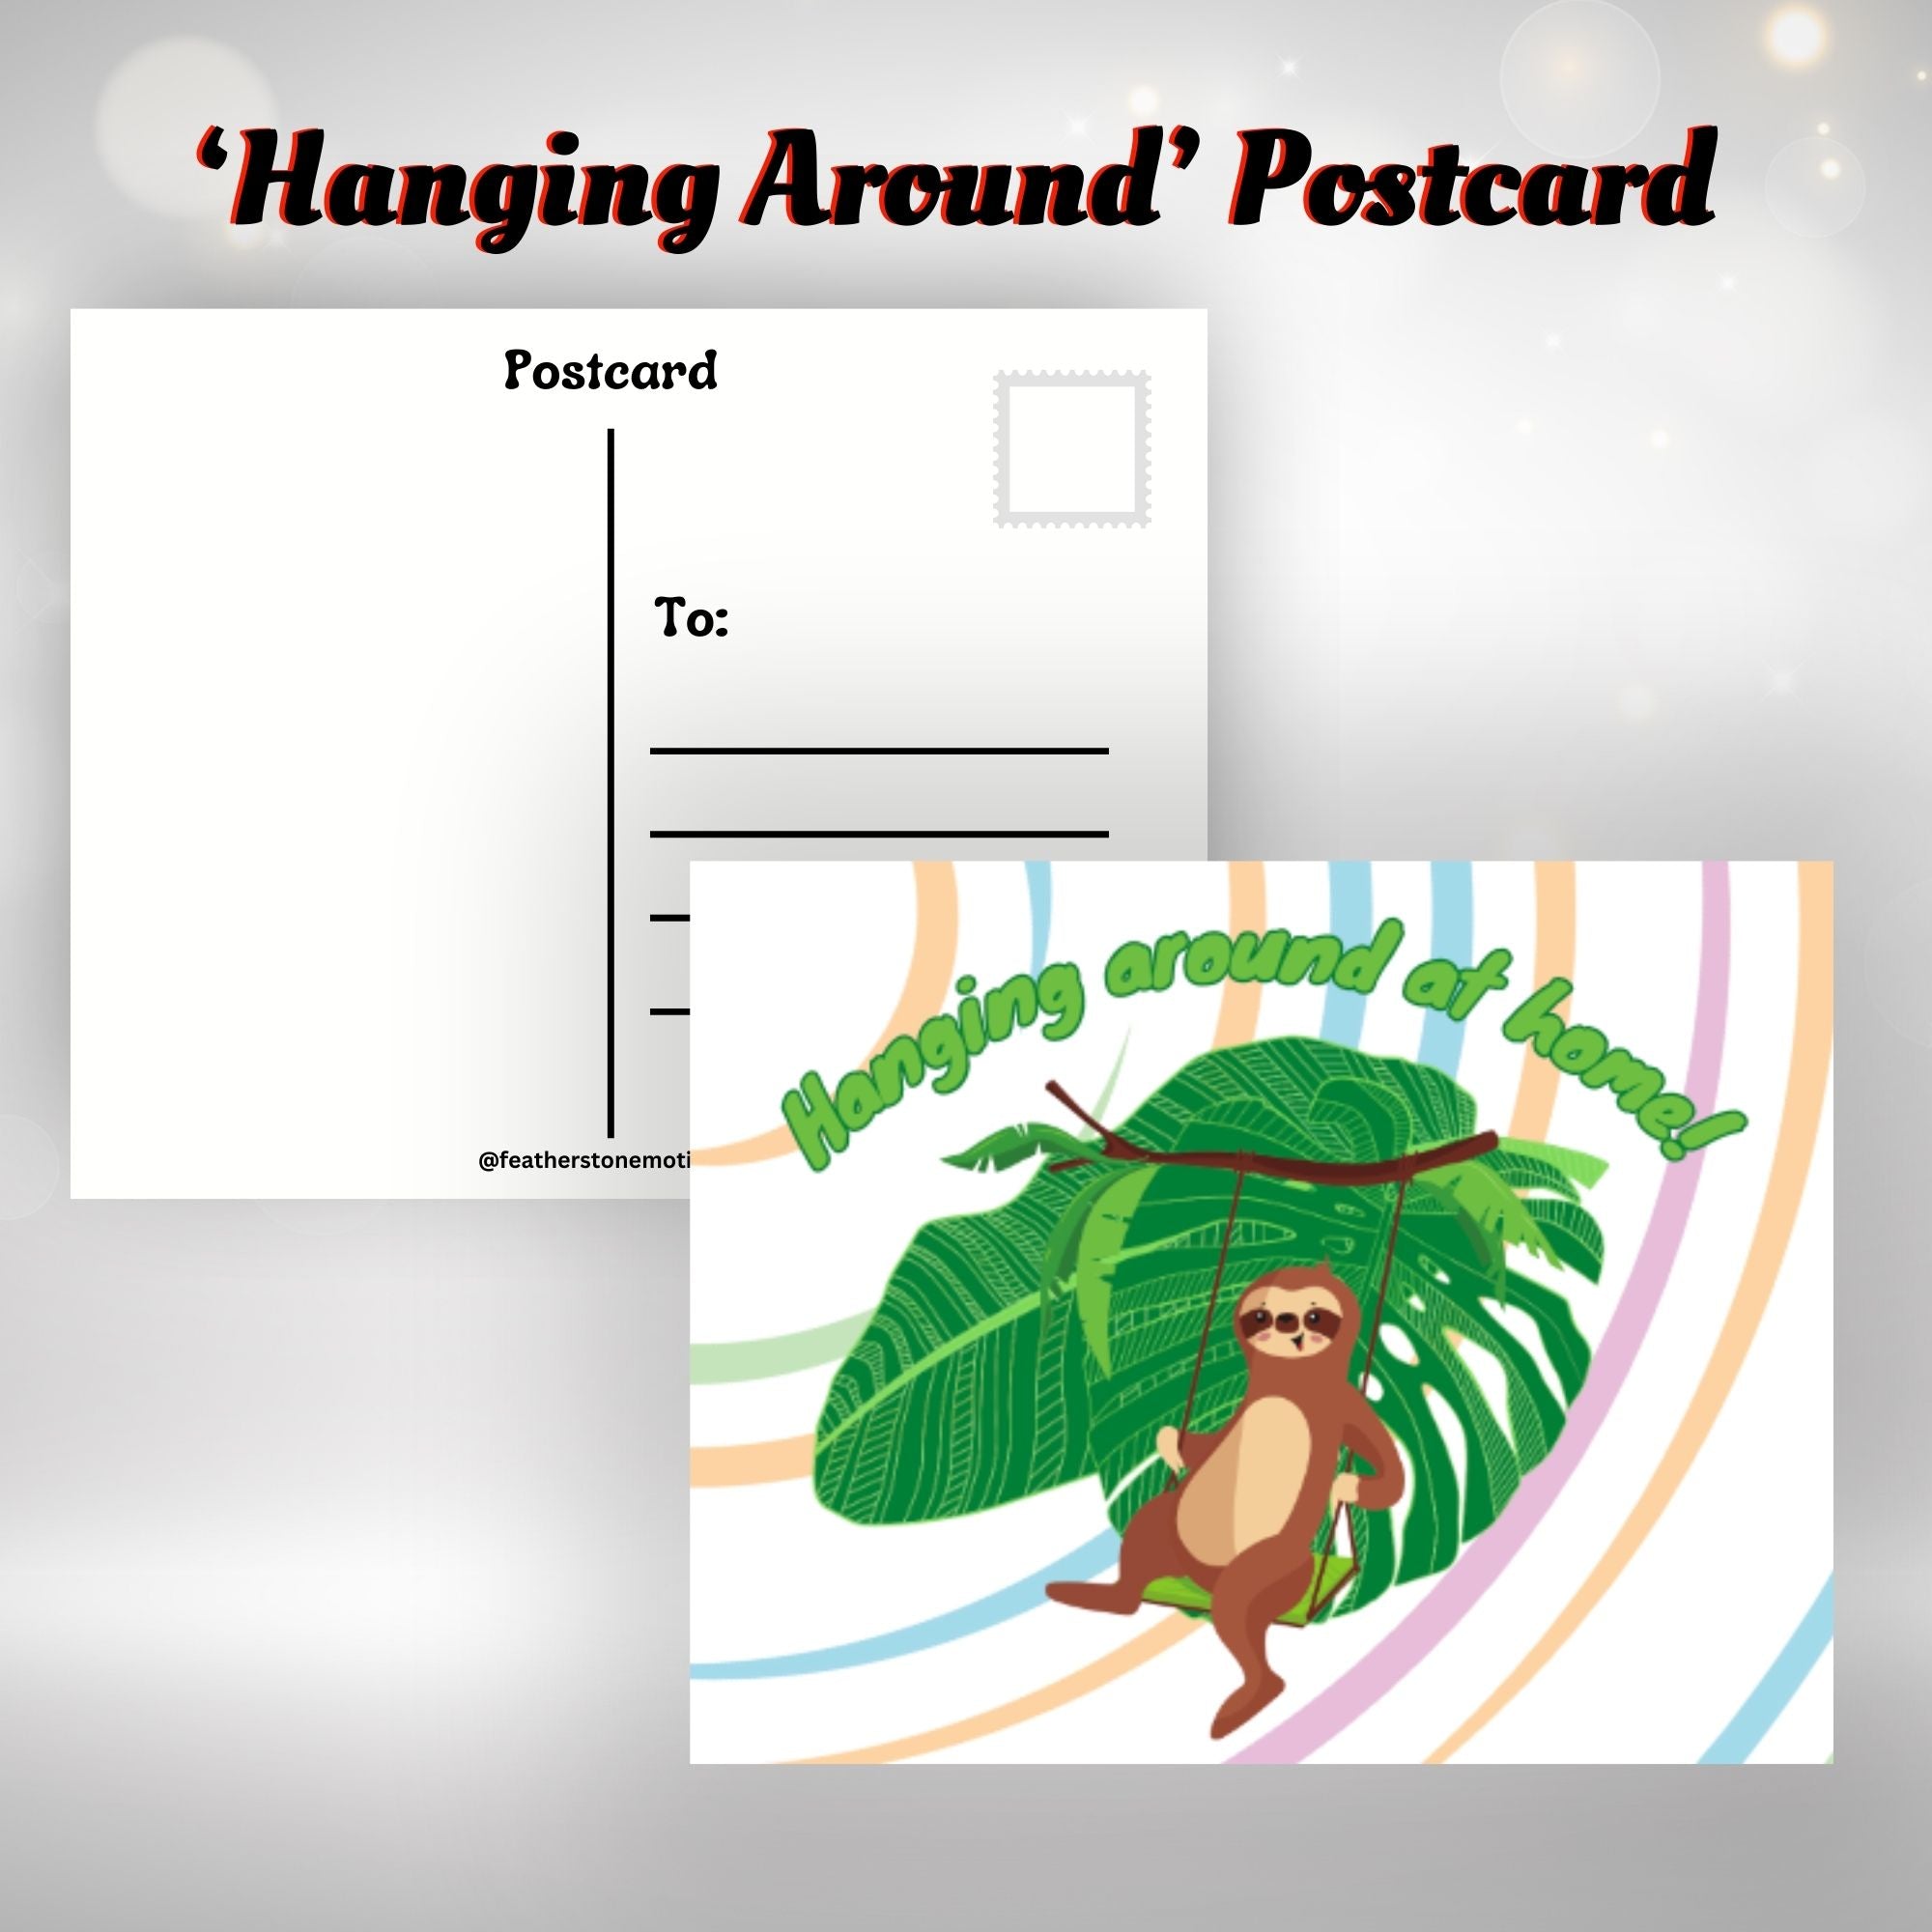 This image shows the Hanging Around at Home! postcard with a sloth on a swing with a large leaf behind.